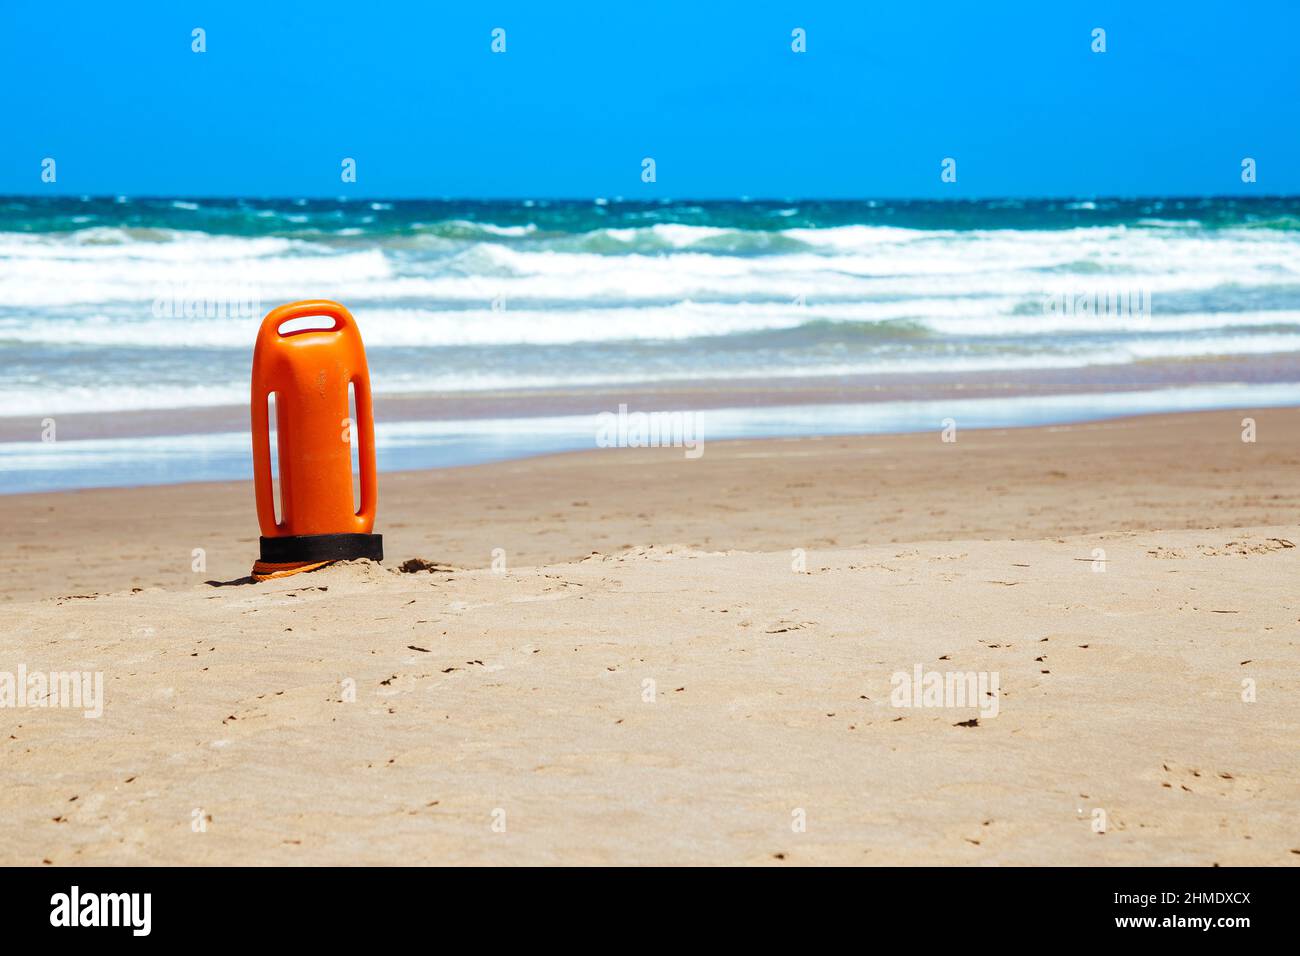 Lifeguard rescue can on the beach. Orange rescue buoy in vertical position on the sand. Stock Photo